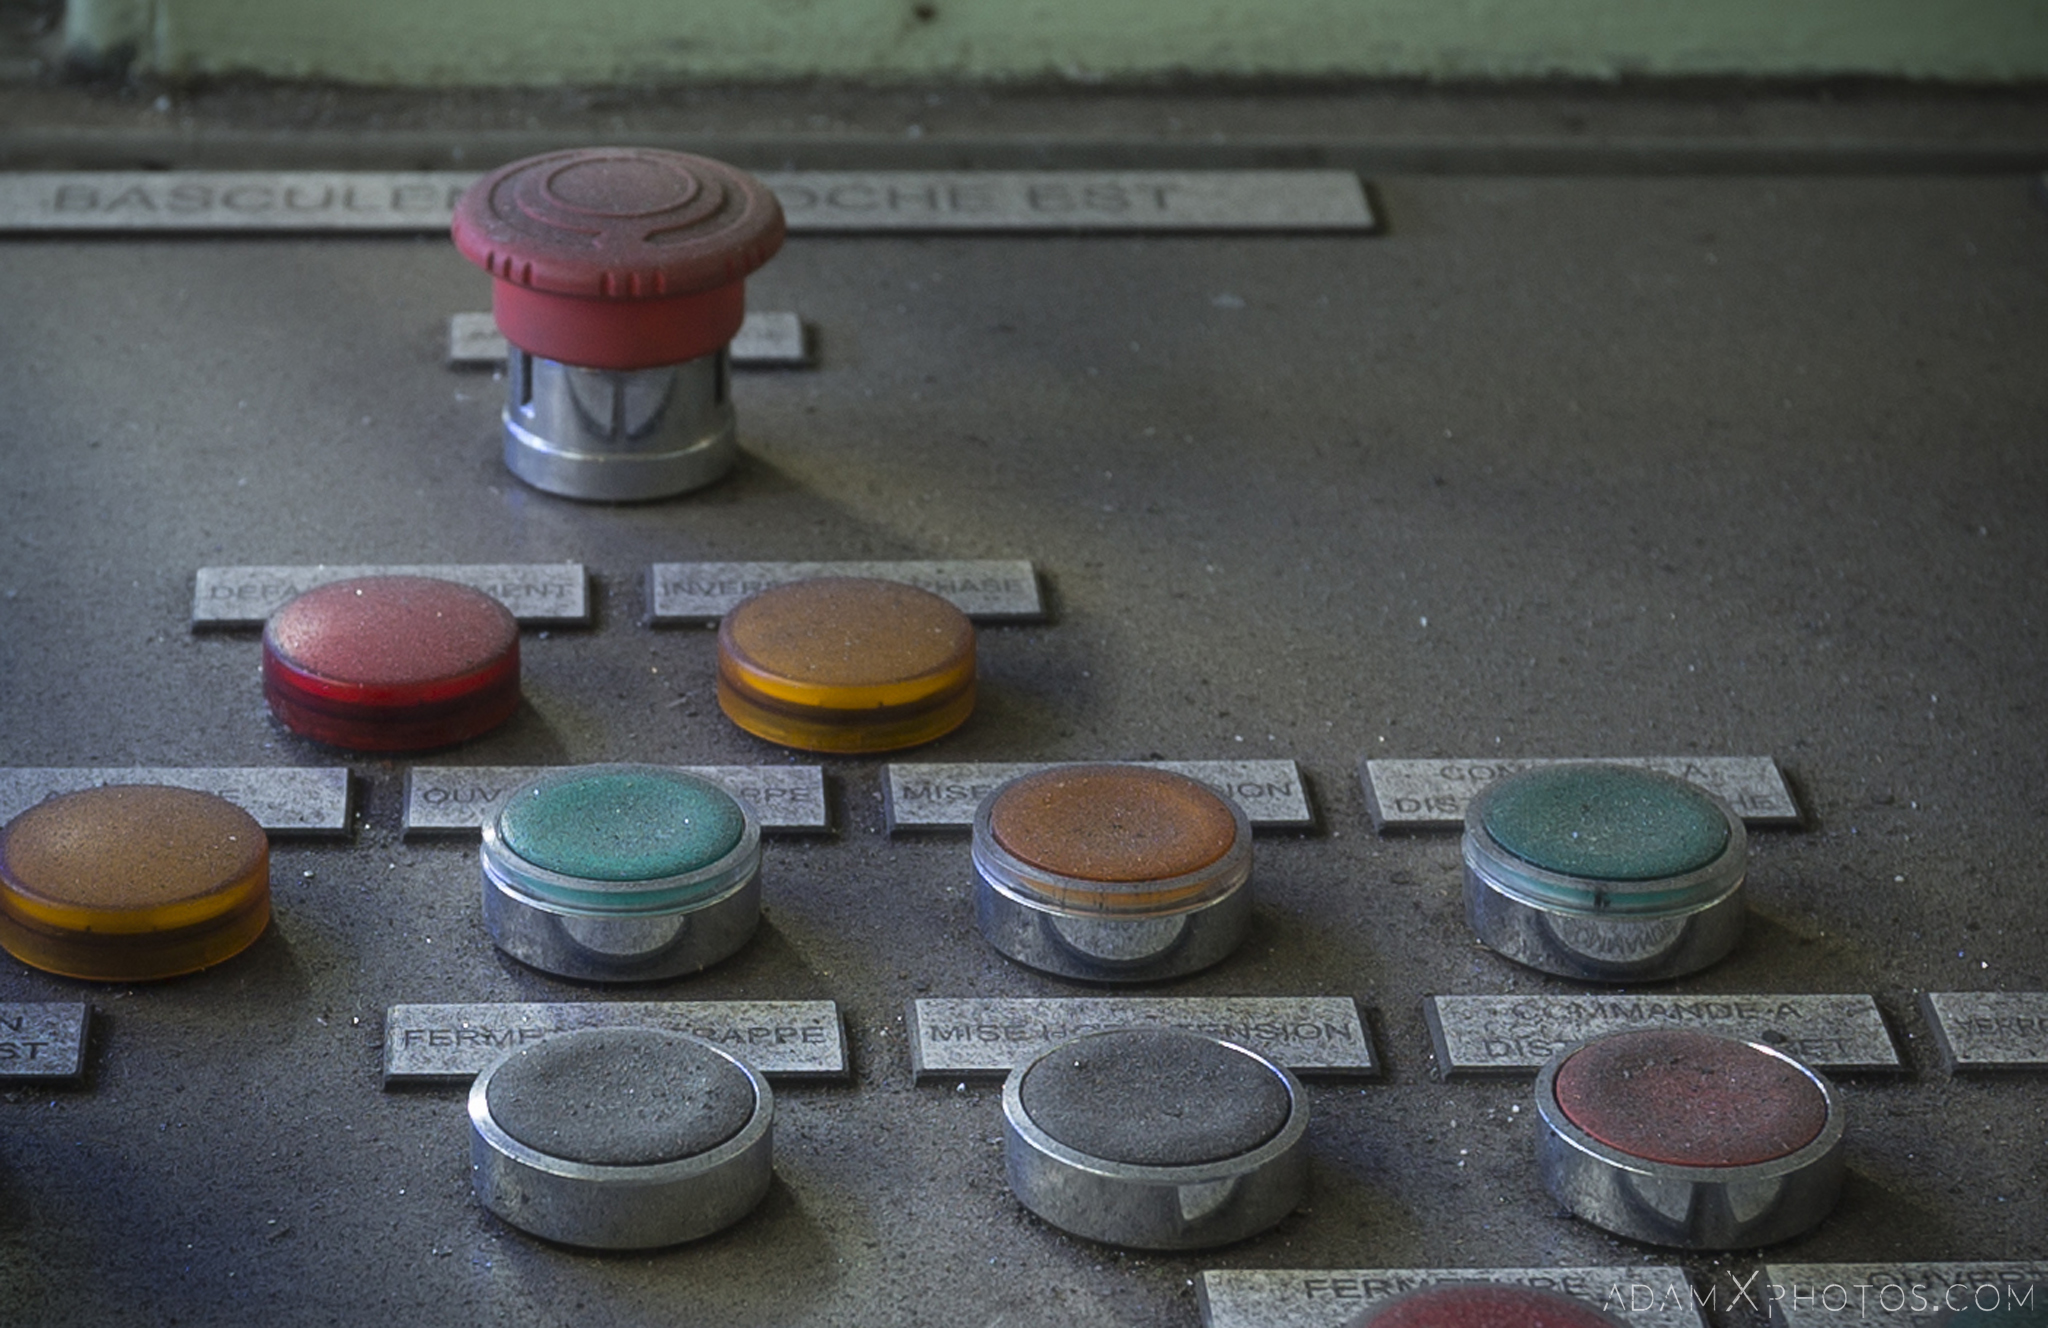 control room buttons HFX Florange Hayange ArcelorMittal blast furnaces steel works plant Industrial Industry Adam X Urbex Urban Exploration France Access 2017 Abandoned decay lost forgotten derelict location creepy haunting eerie